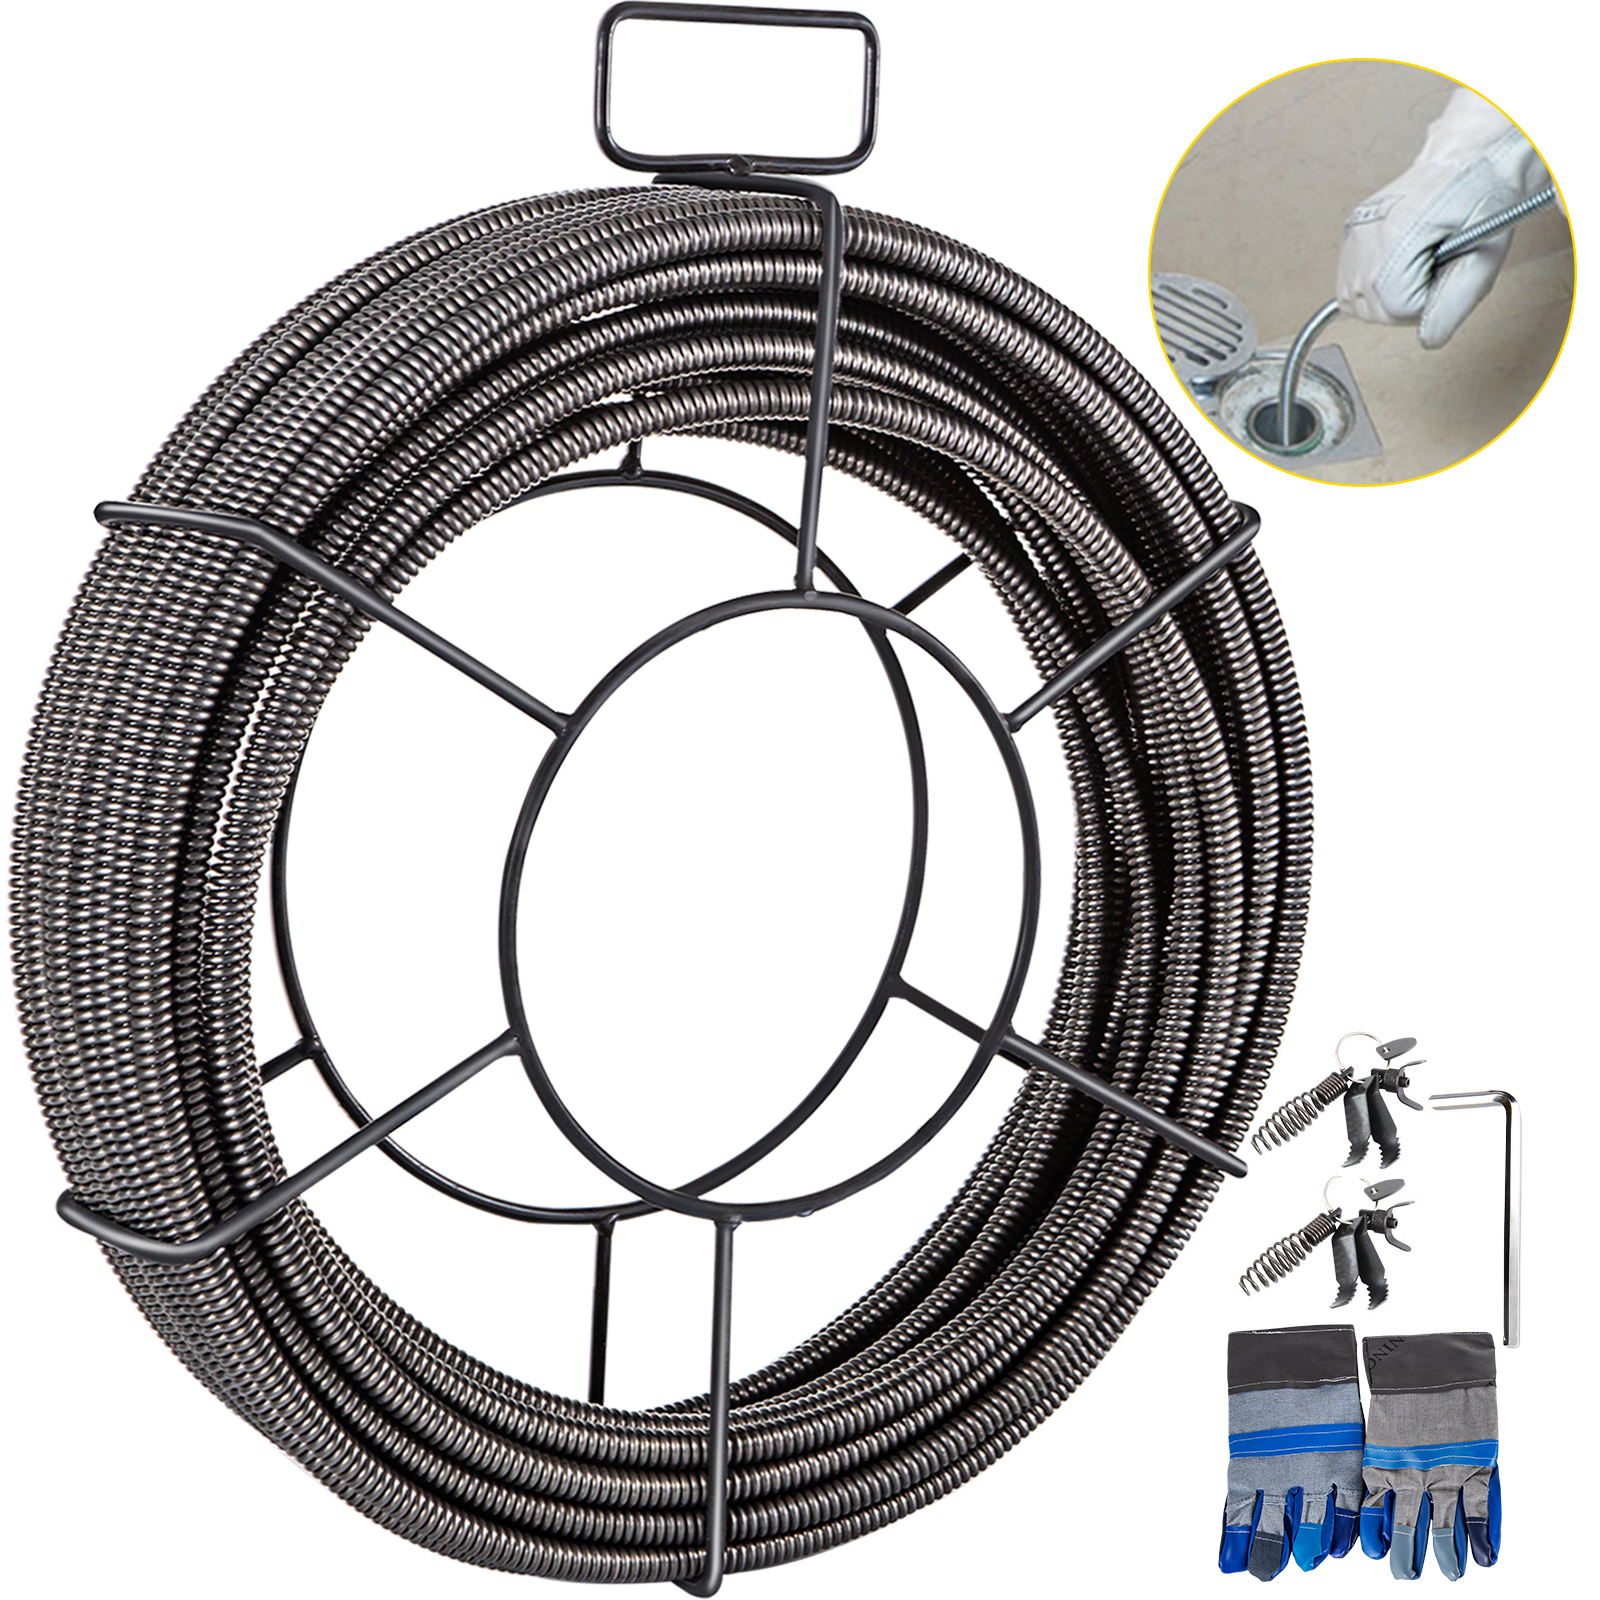 DrainX Drain Auger 15-Ft Plumbing Snake Flexible Steel Drain Cleaning Cable  